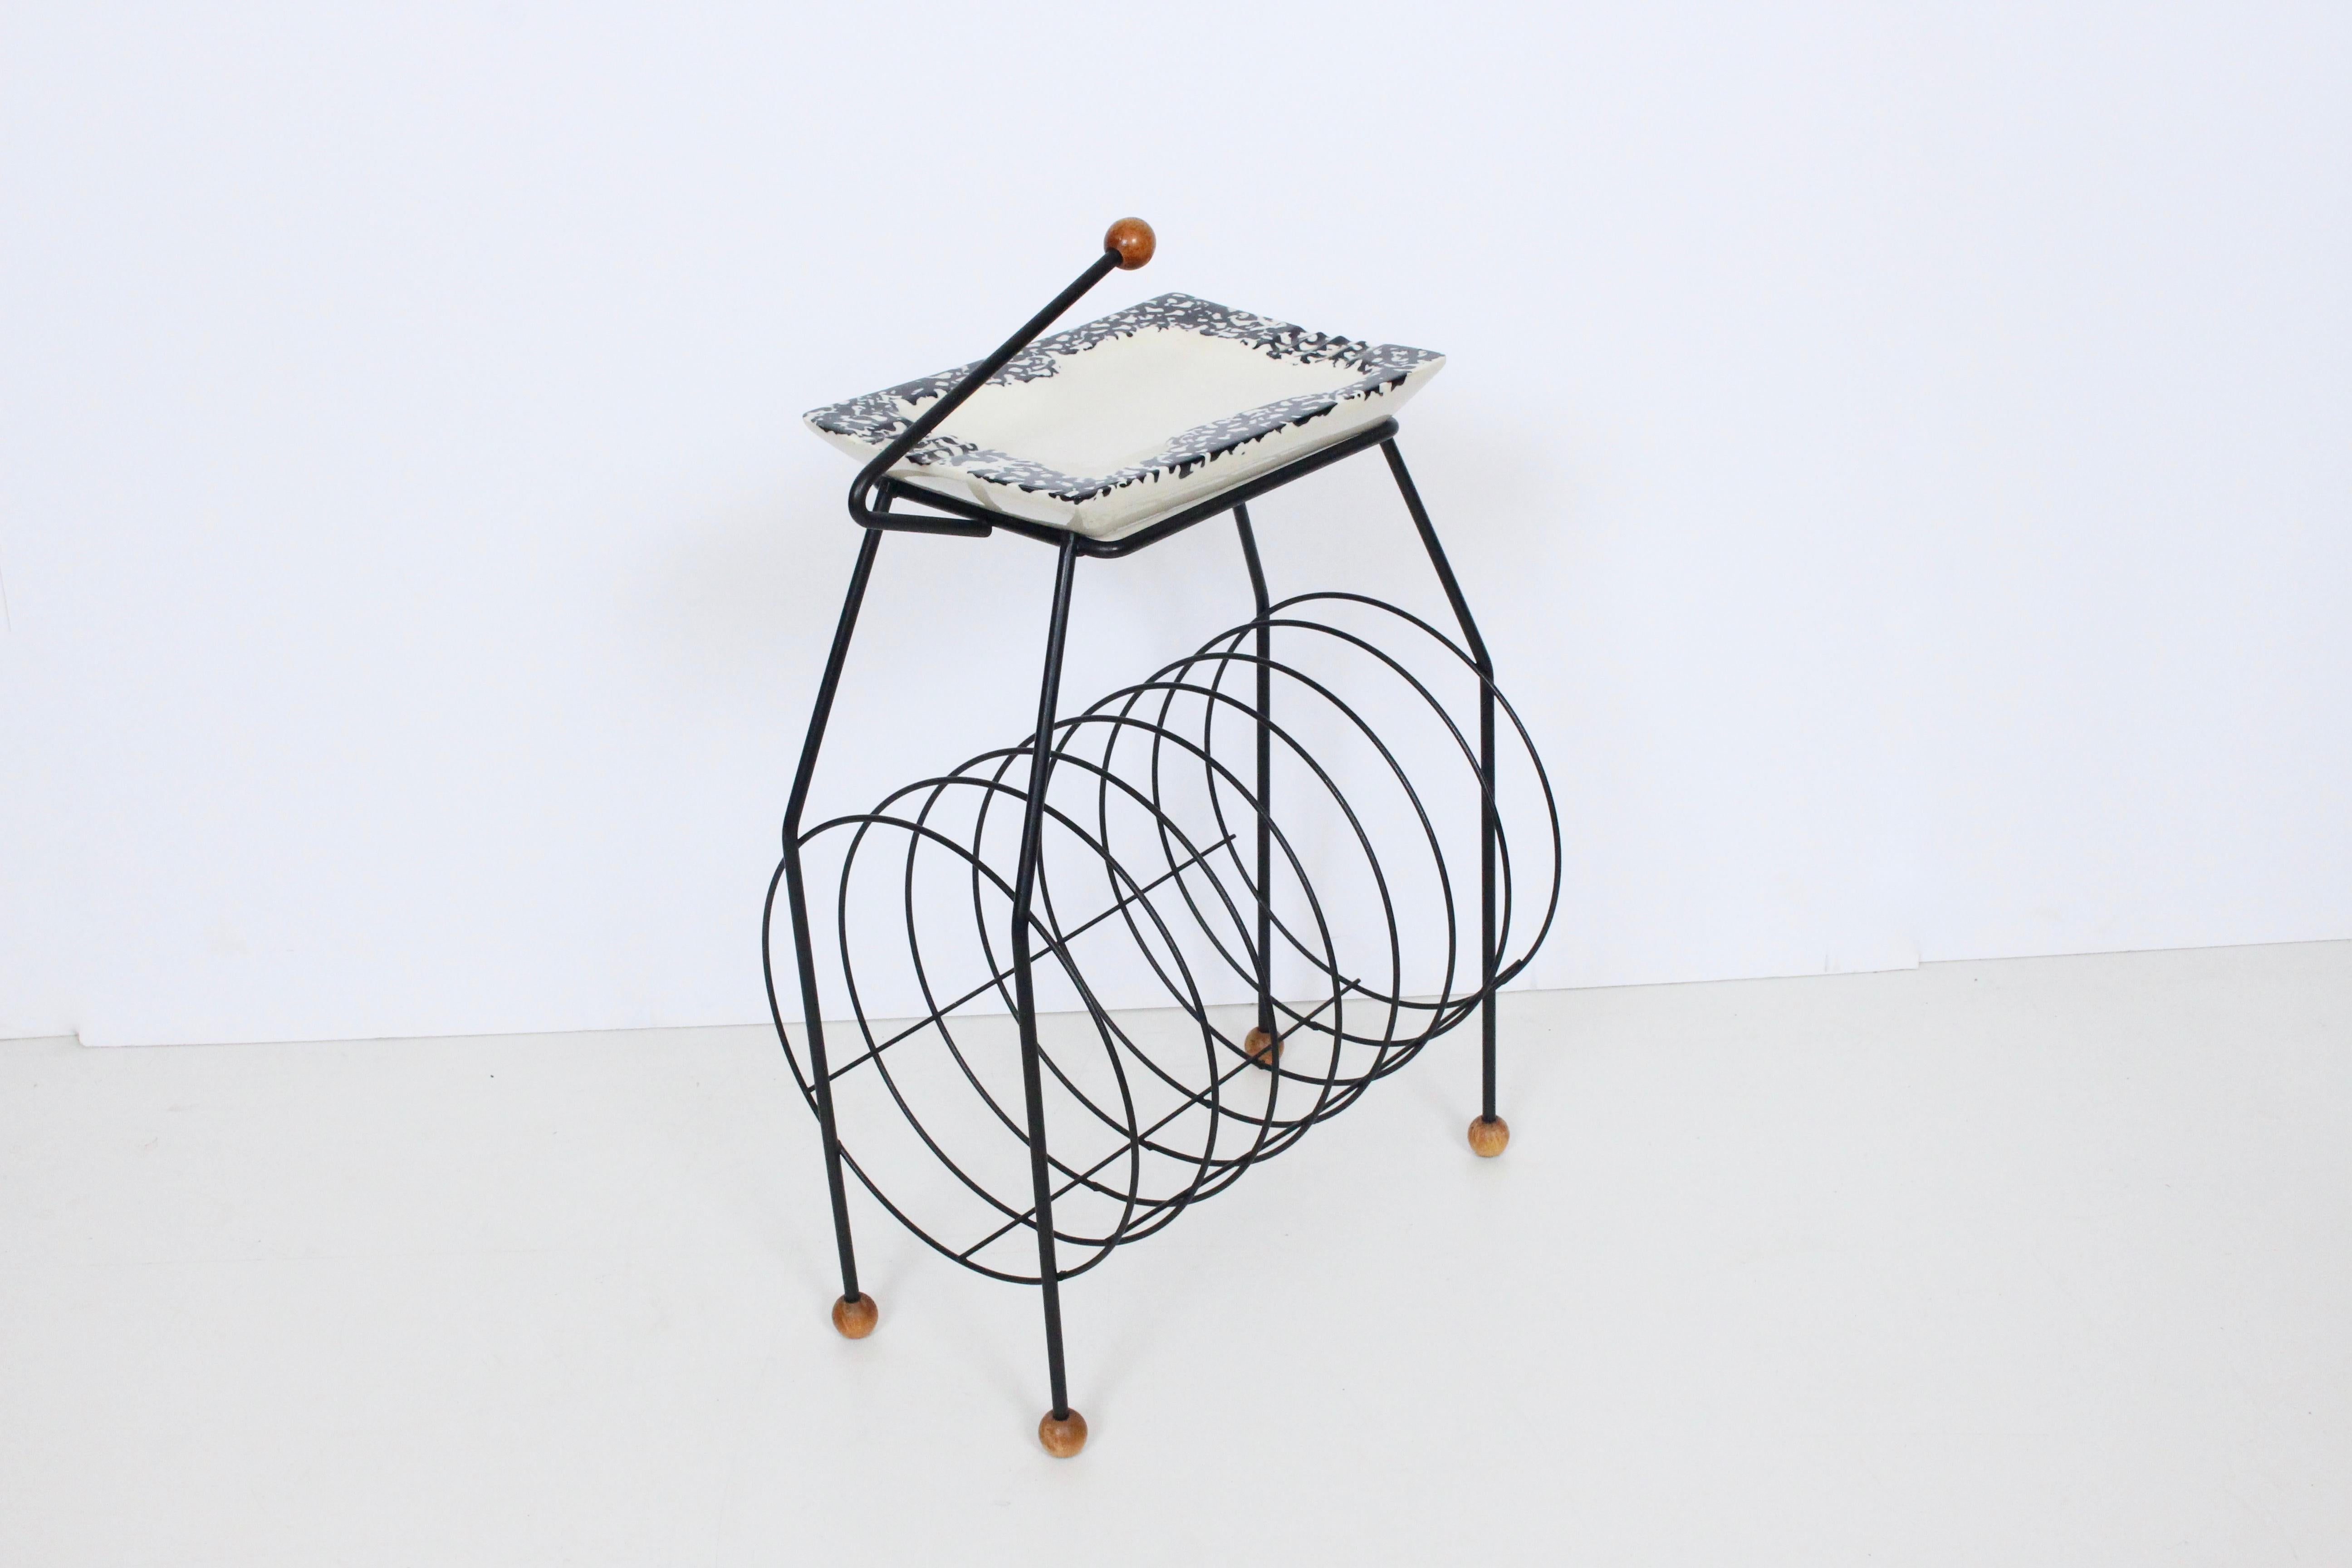 Tony Paul Atomic Record Stand, Smoking Stand with Ceramic Dish, Ashtray. Featuring a spiral Black Iron wire framework, cylindrical form, round wooden handle and feet, rectangular glazed Cream Stoneware tray (10.5W x 7.5D) with black abstract